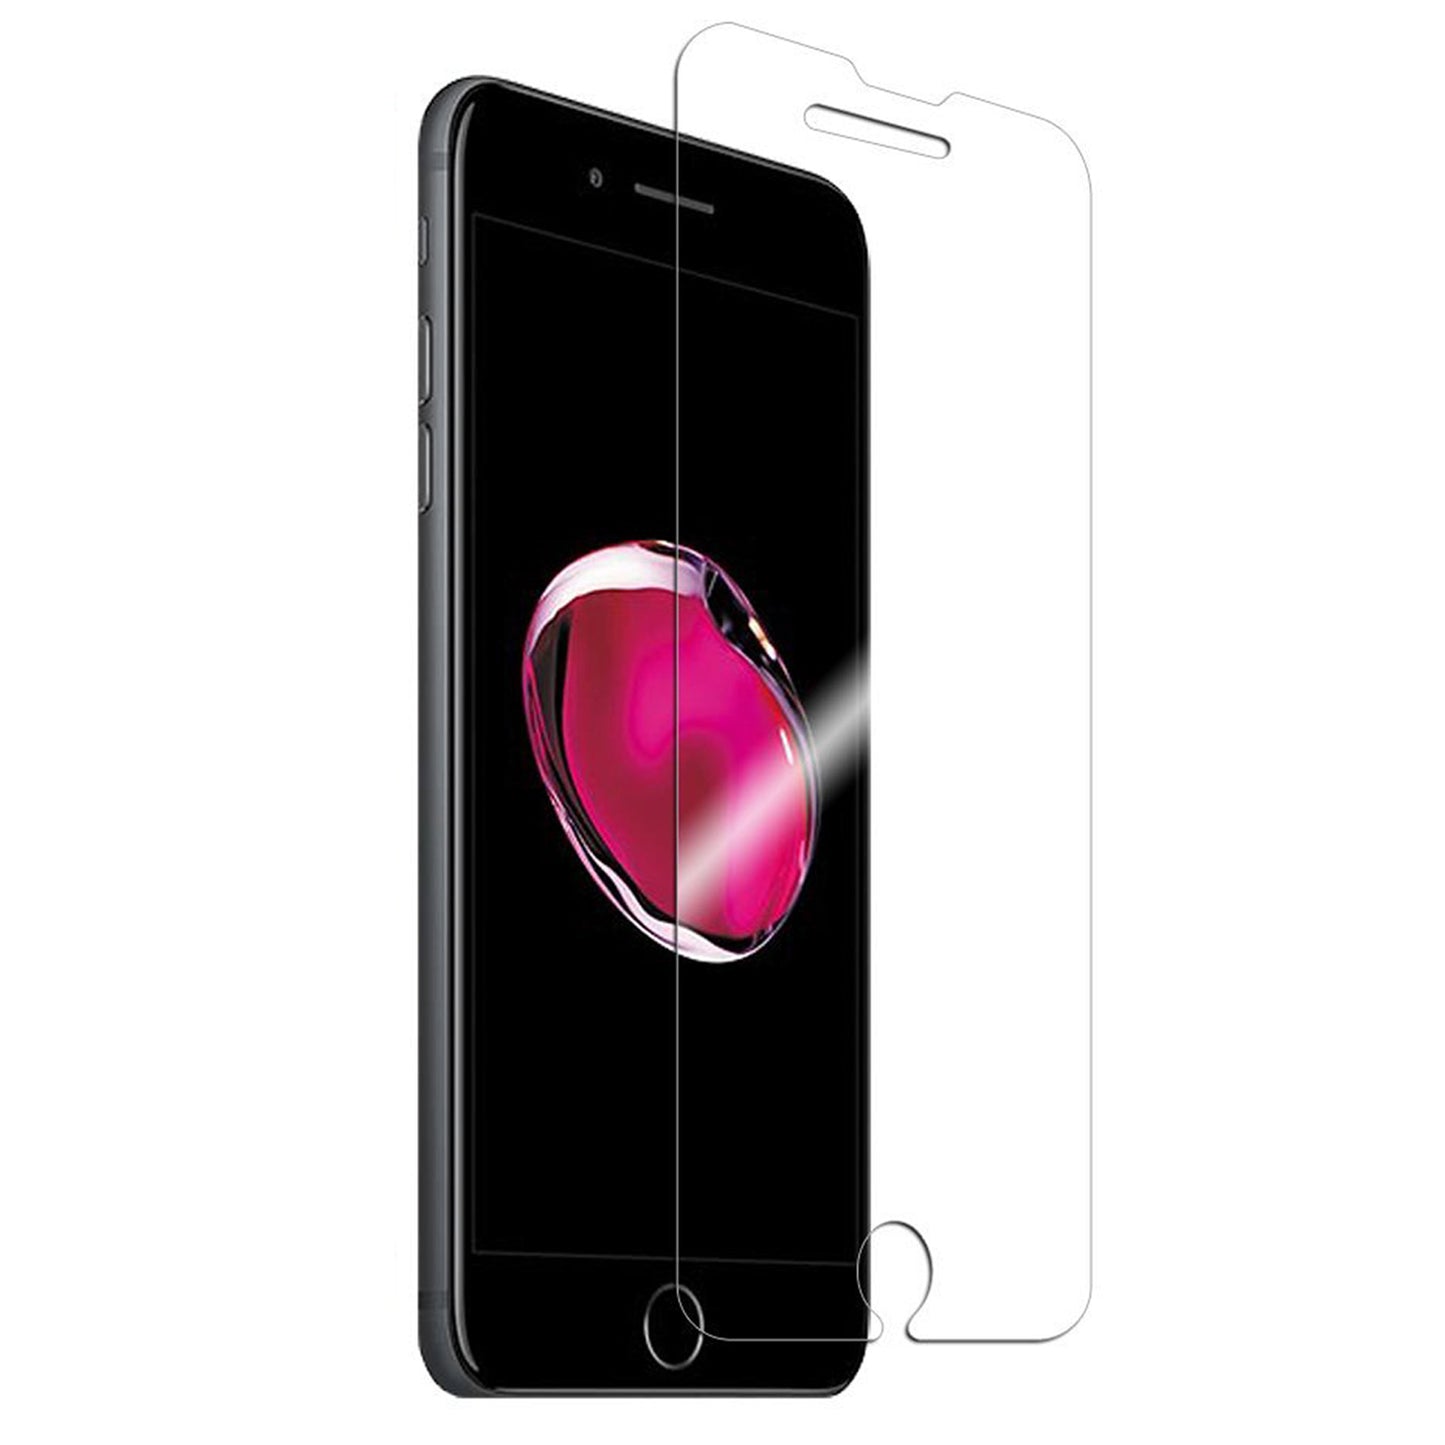 [3 Pack] MEZON Apple iPhone 7 (4.7") Ultra Clear Screen Protector Case Friendly Film (iPhone 7, Clear)